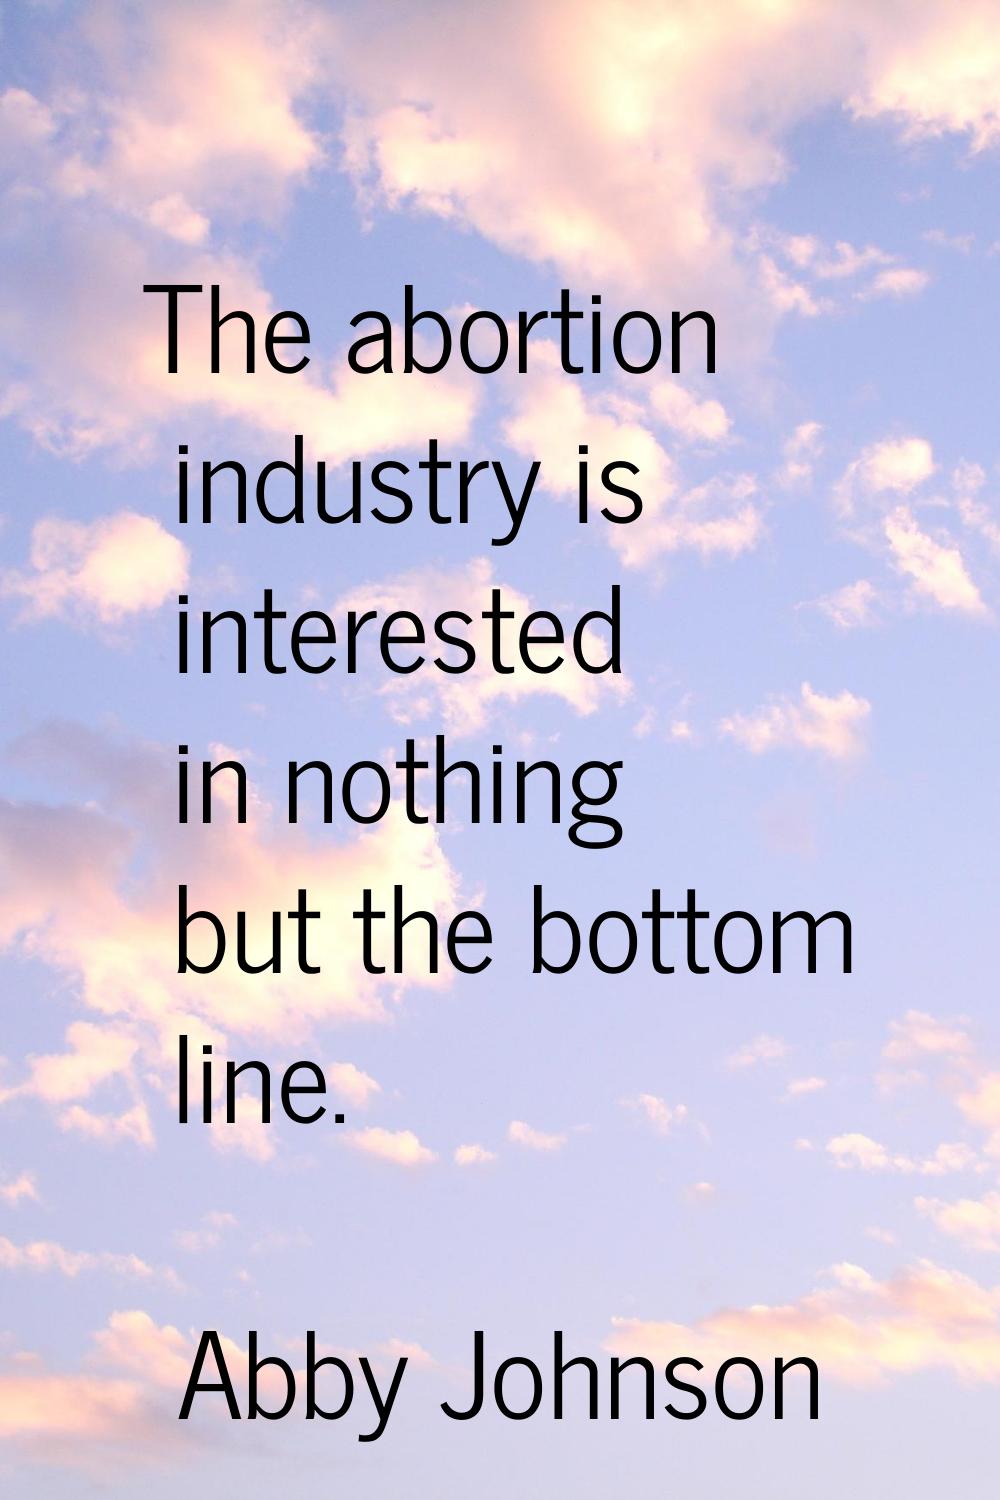 The abortion industry is interested in nothing but the bottom line.